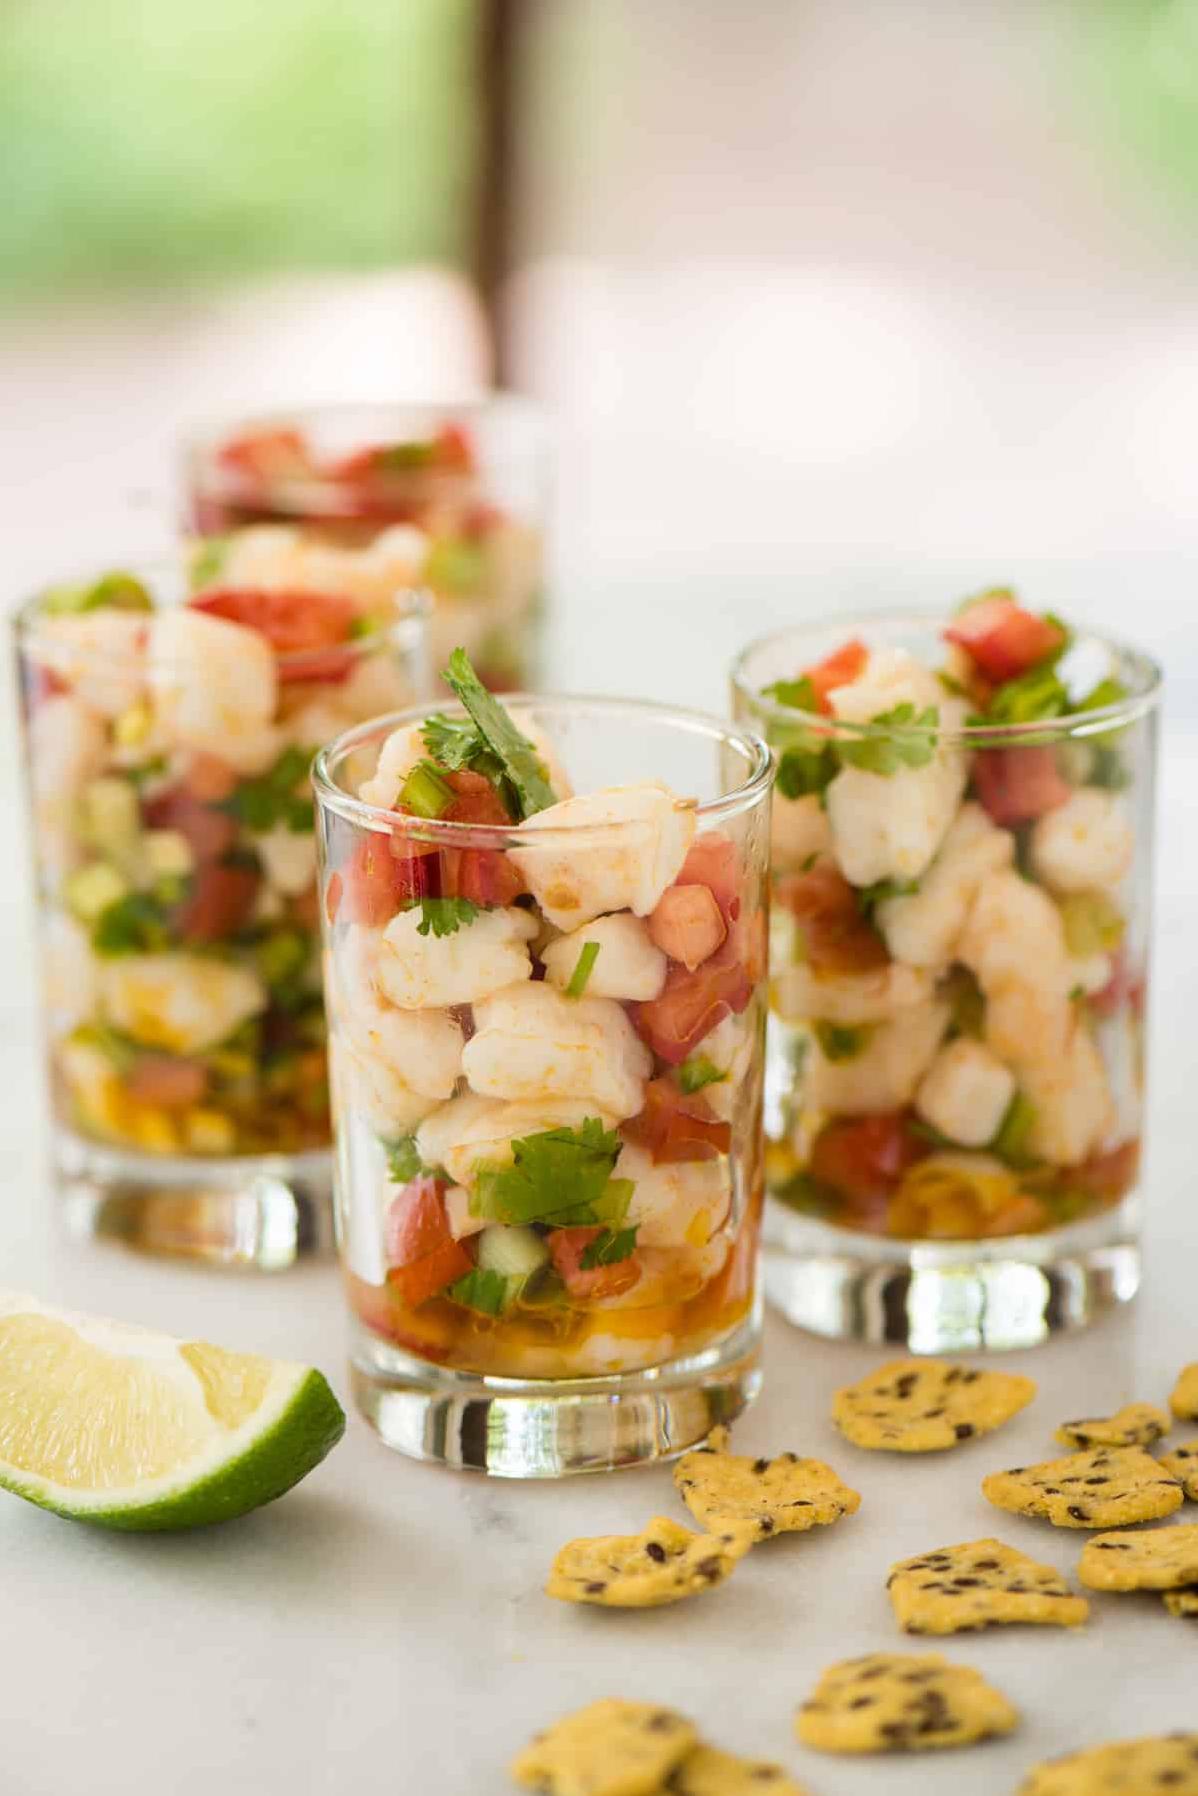  Bite-sized pieces of shrimp, marinated in a tangy lime juice, make this ceviche the ultimate party-ready dish!